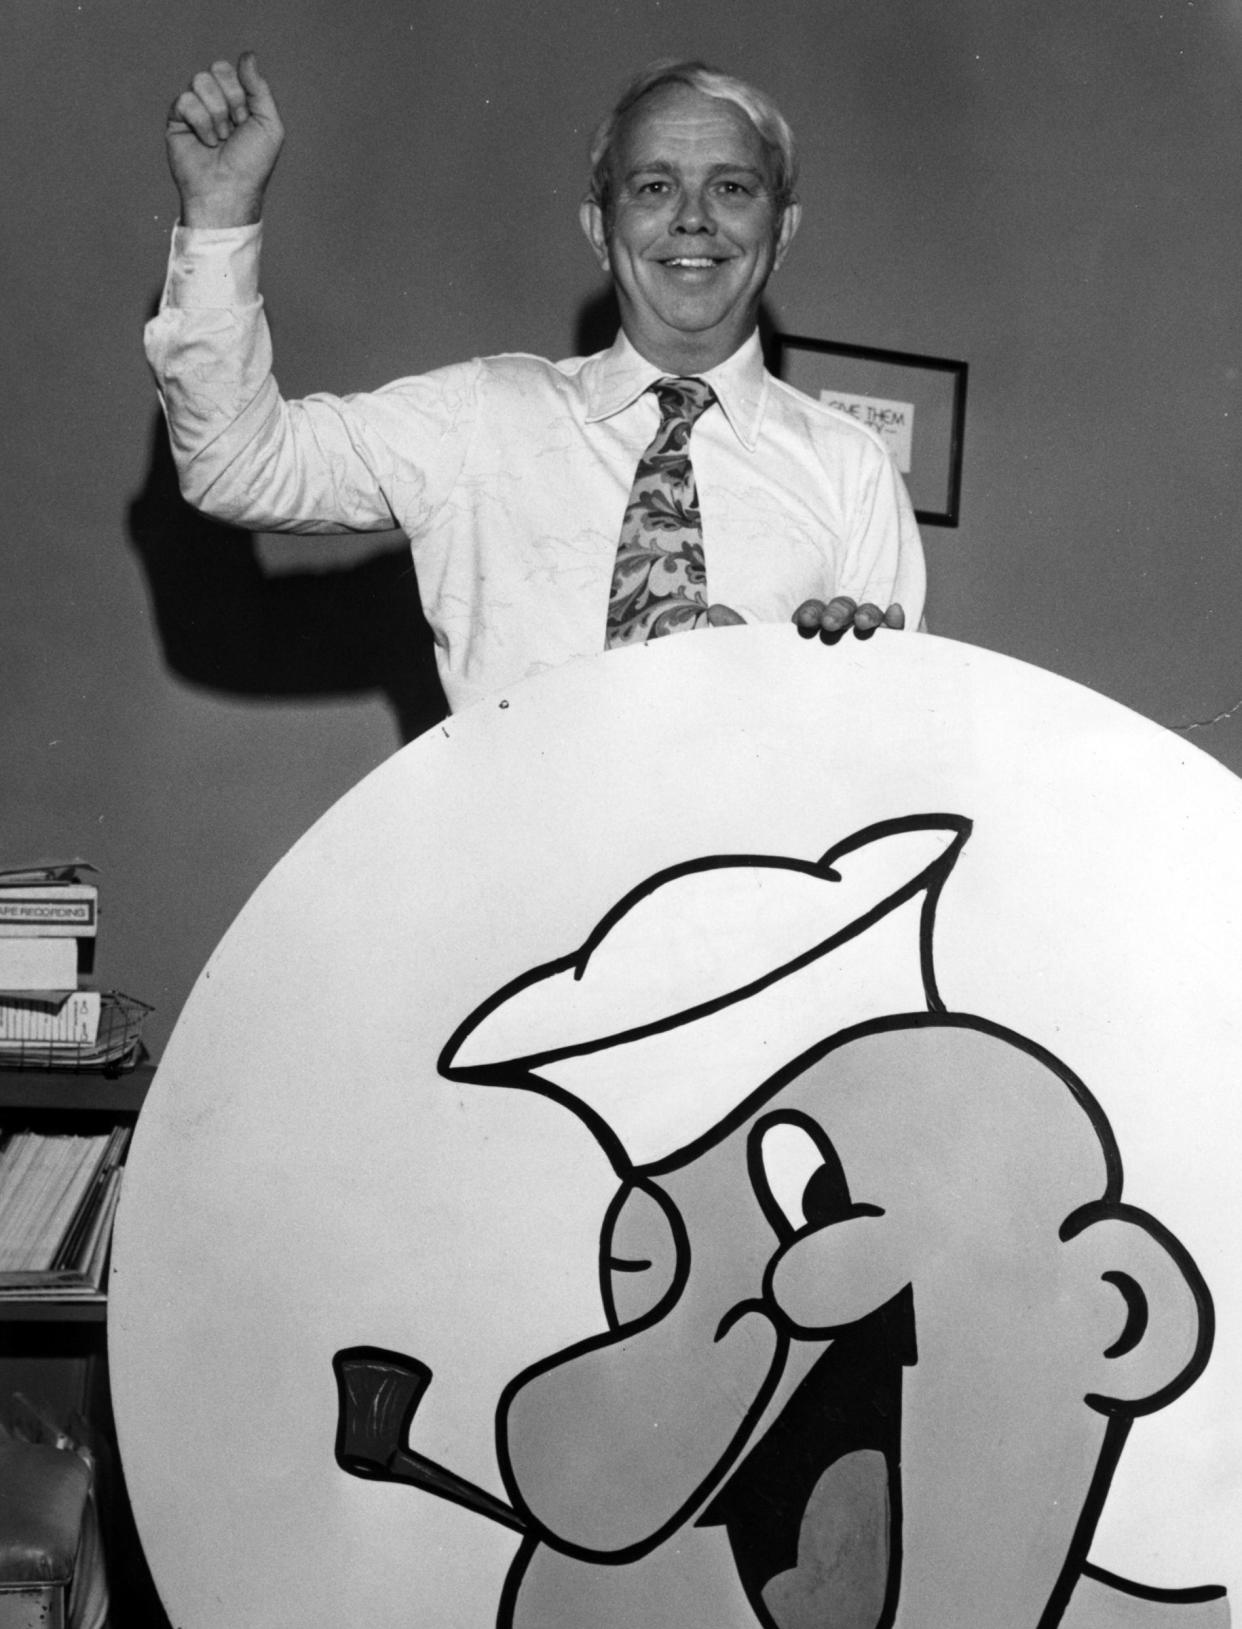 WTLV television's Ed McCullers, aka "Skipper Ed," stands behind a Popeye sign in this 1979 photo.